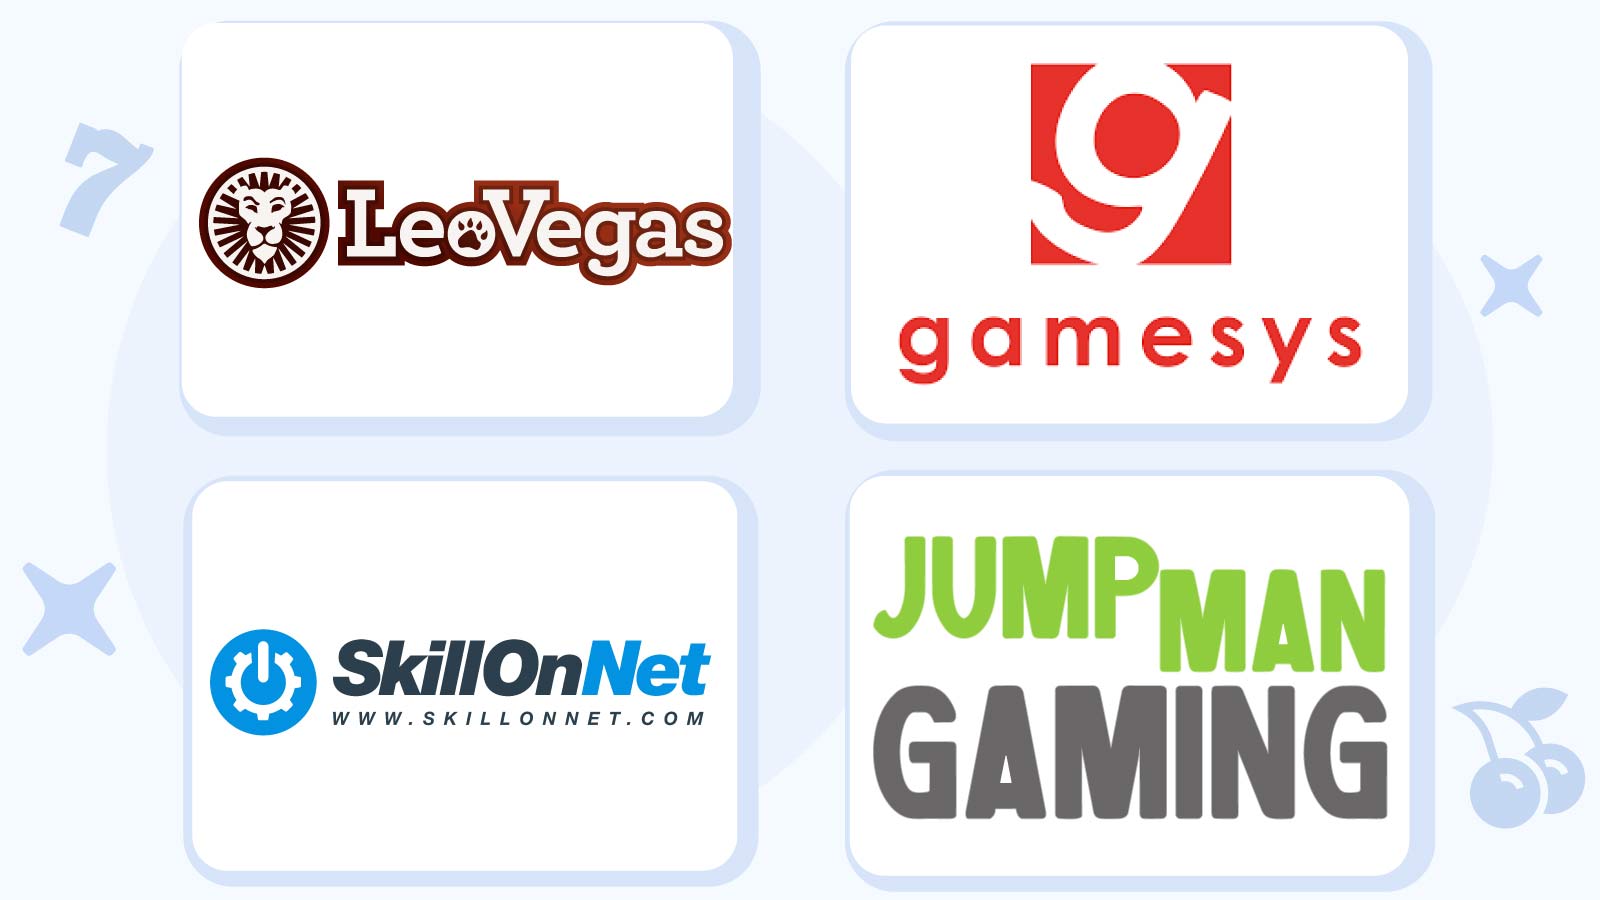 5 of the Most Popular Online Casino Operators in the UK